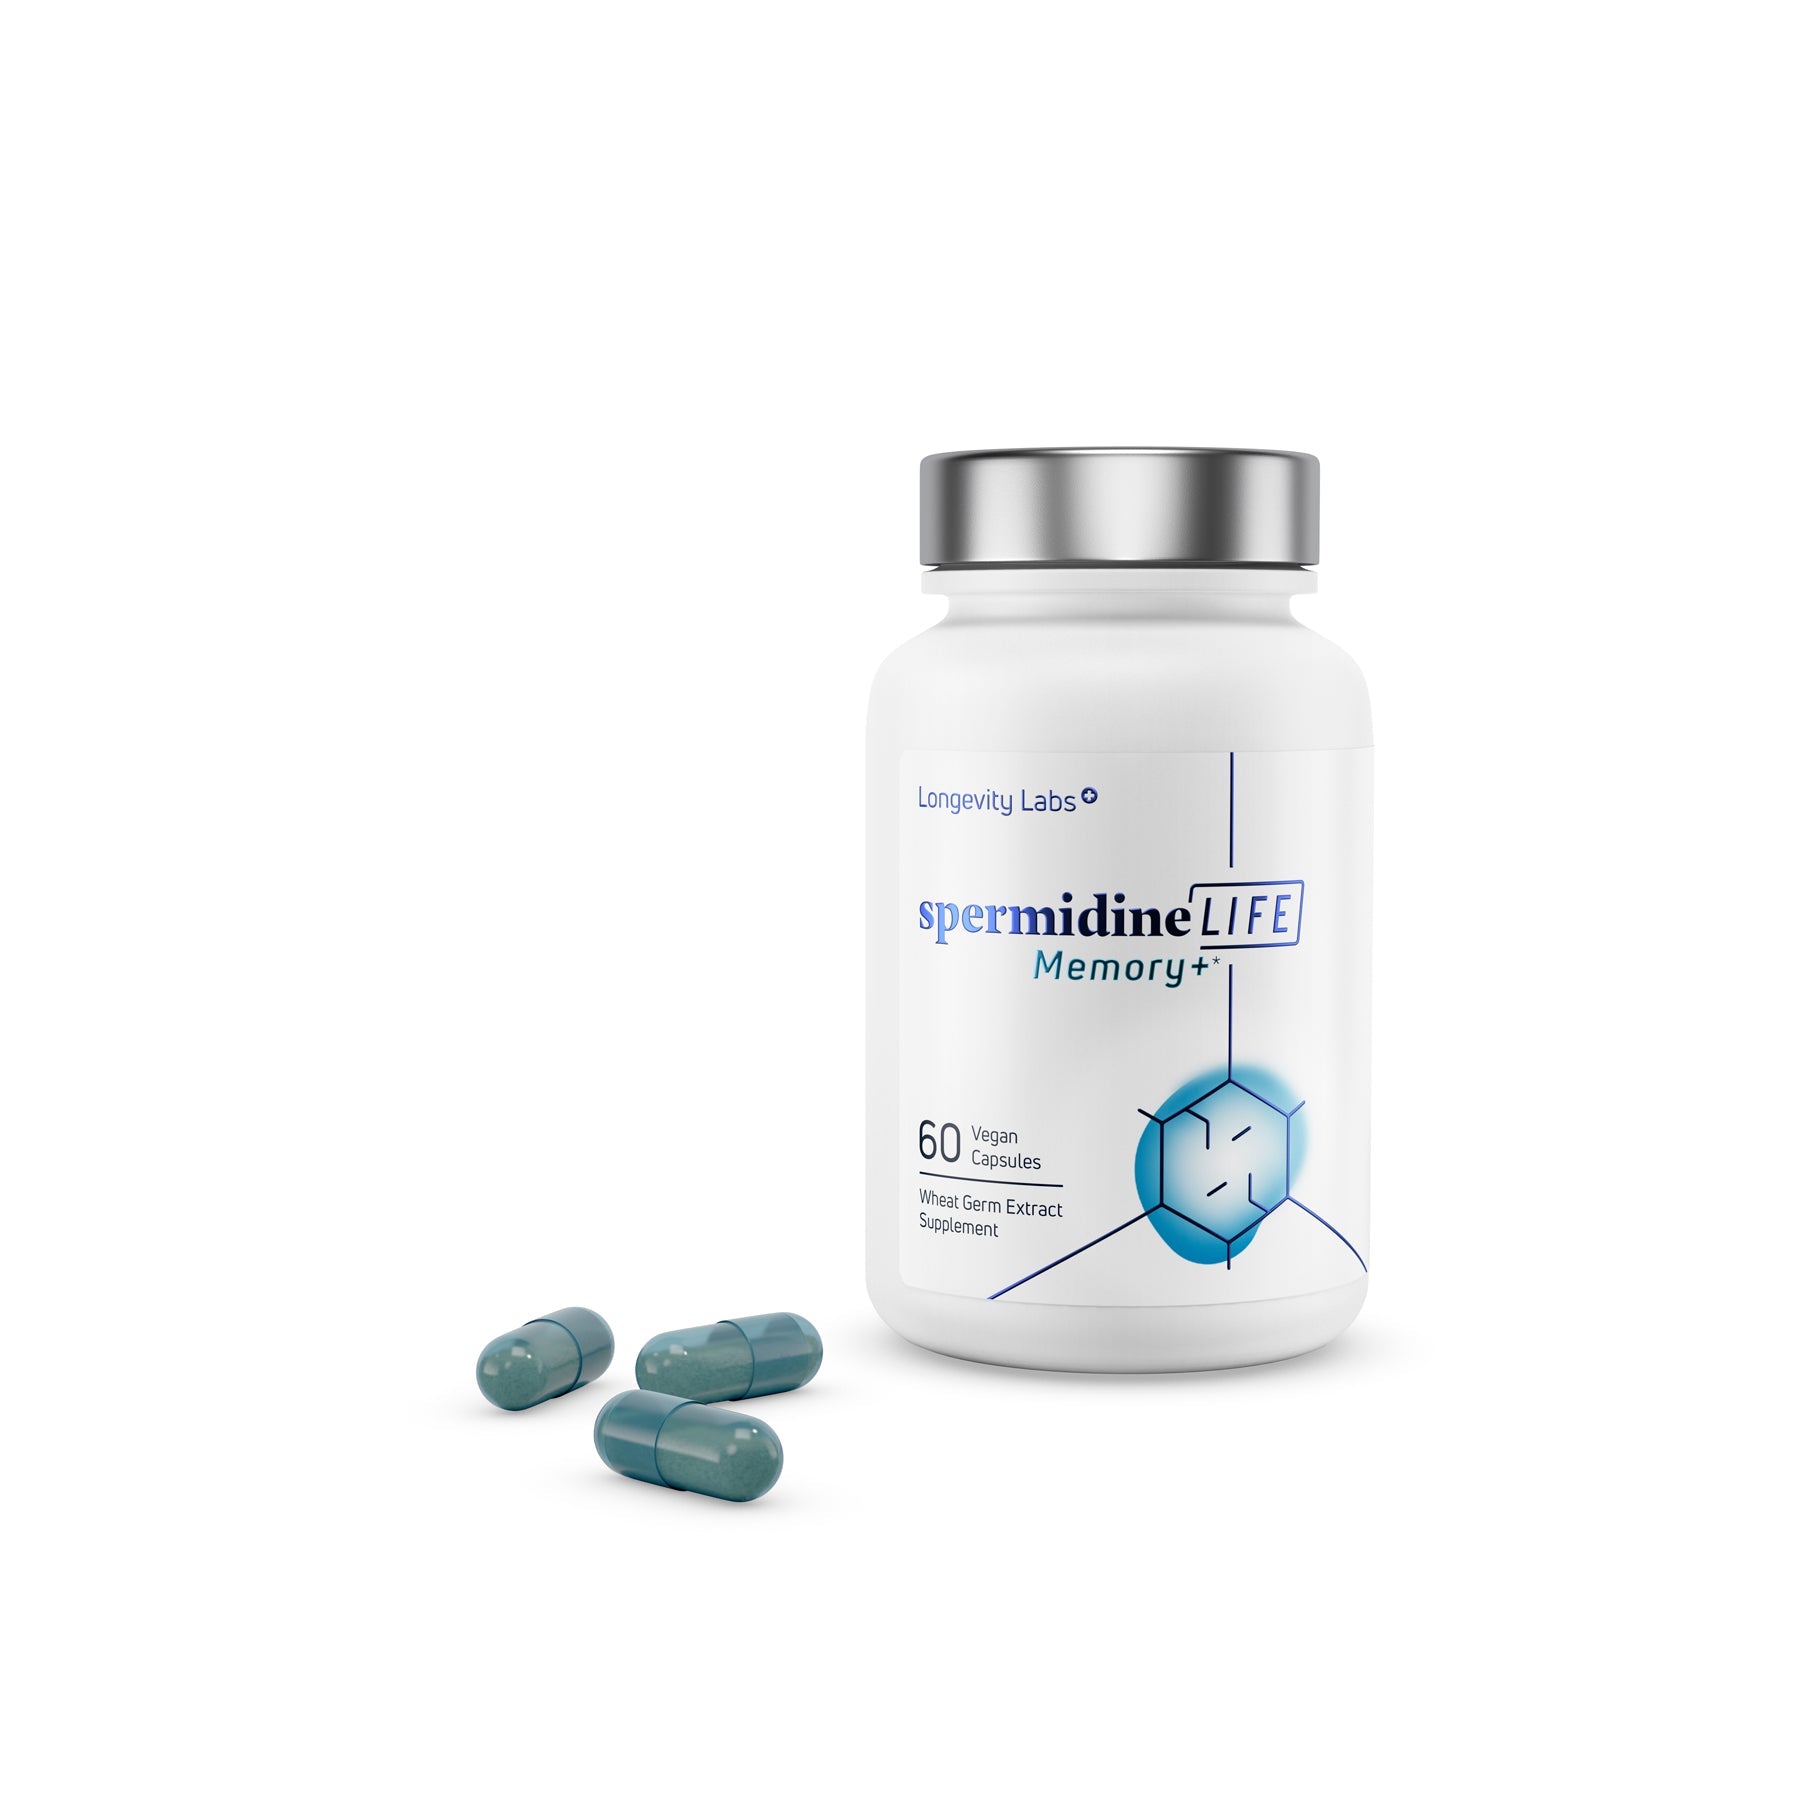 A bottle of the Longevity Labs' spermidineLIFE® Memory+ 800mg Dietary Supplement, known to promote lifespan and OHP health, placed next to a bottle of water.